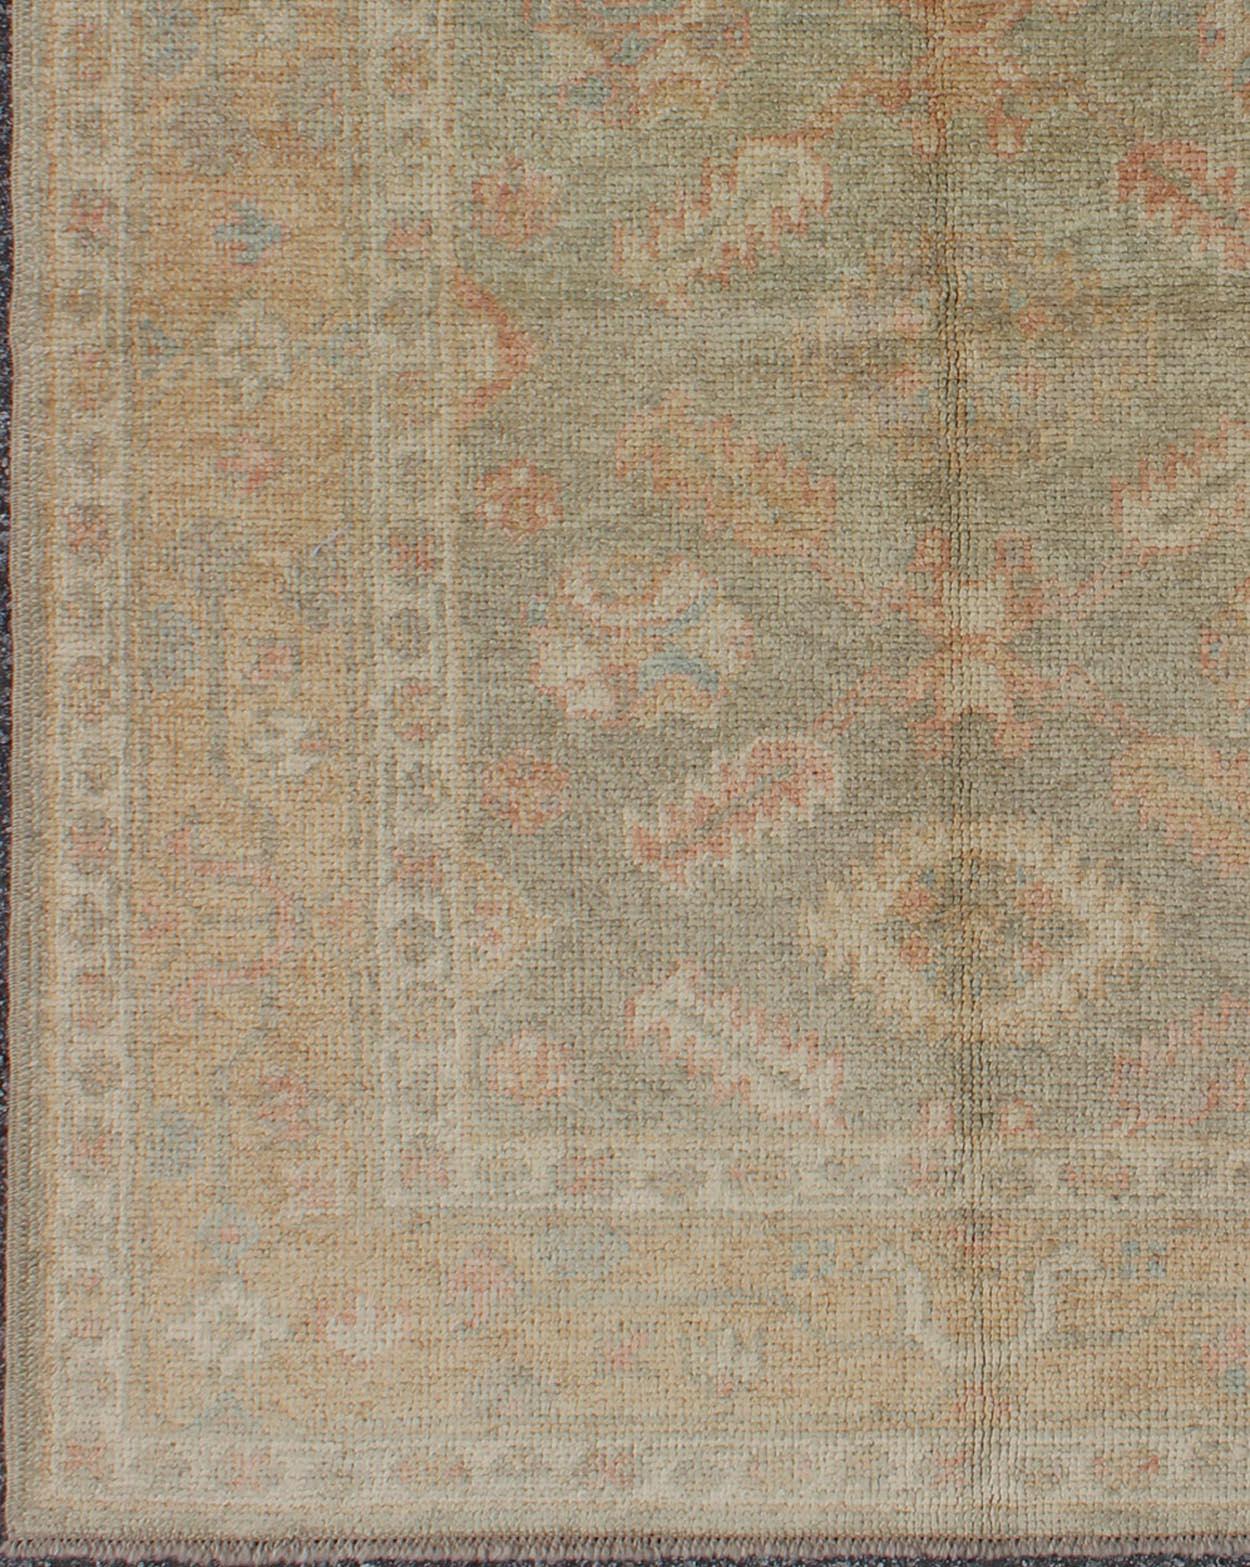 Turkish Oushak rug with neutral color Palette and All-Over flower design, rug en-345, country of origin / type: Turkey / Oushak.

This traditional Oushak rug from Turkey features a subdued, neutral color palette and an all-over design of floral